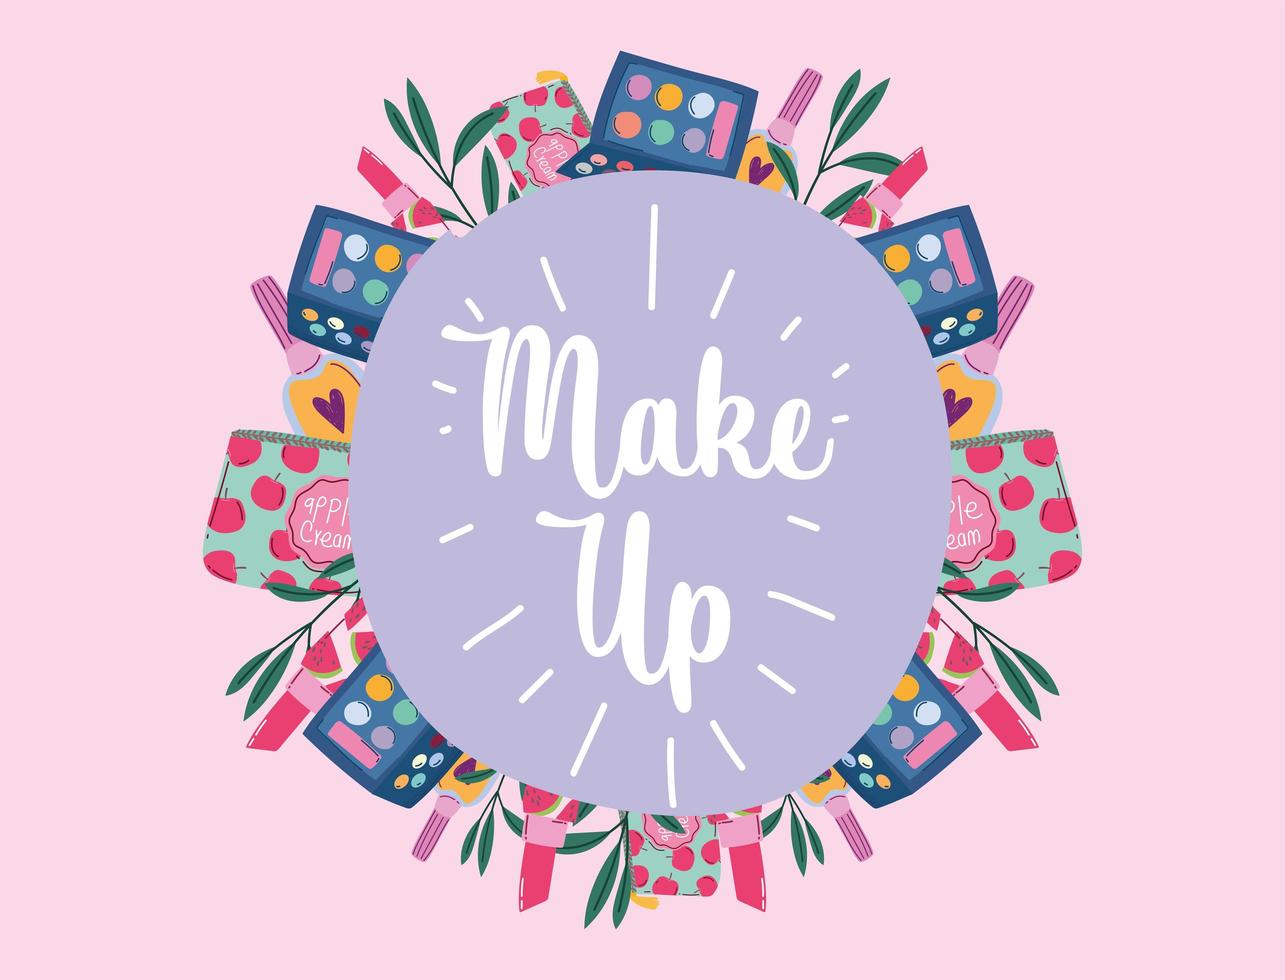 Make-up and beauty products label with lettering vector